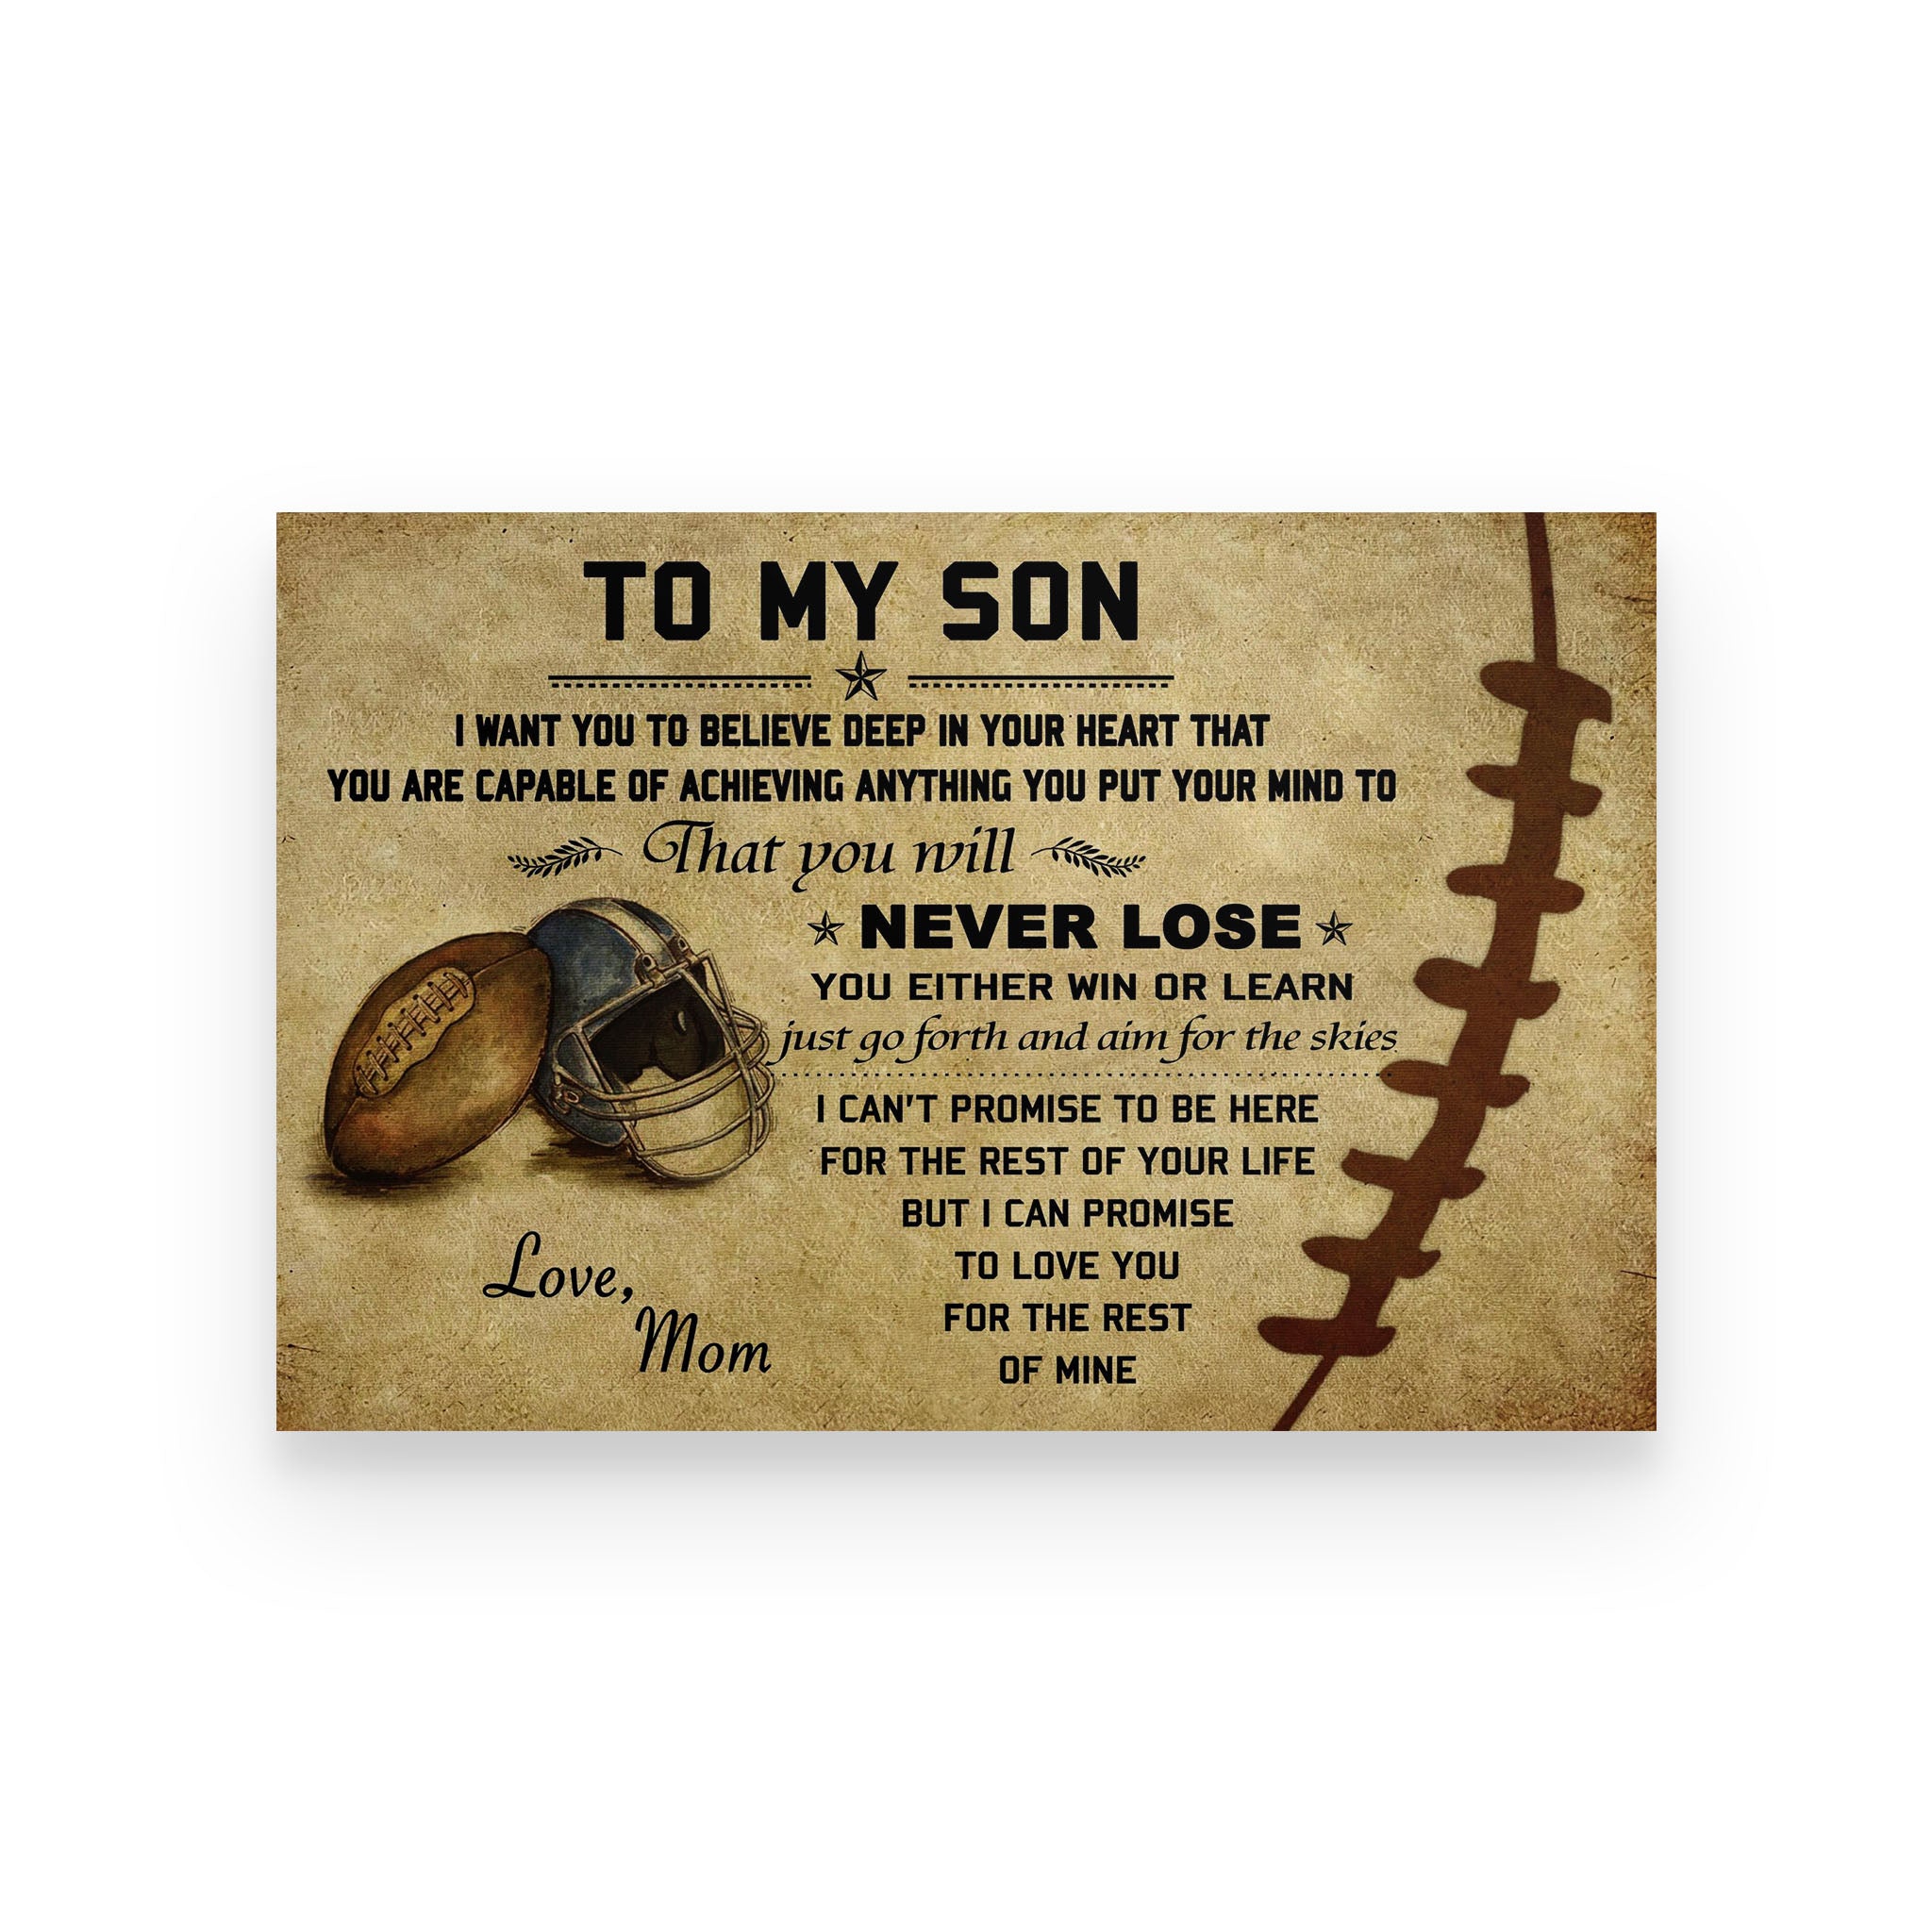 American football poster mom to son I want you to believe deep in your heart vs2